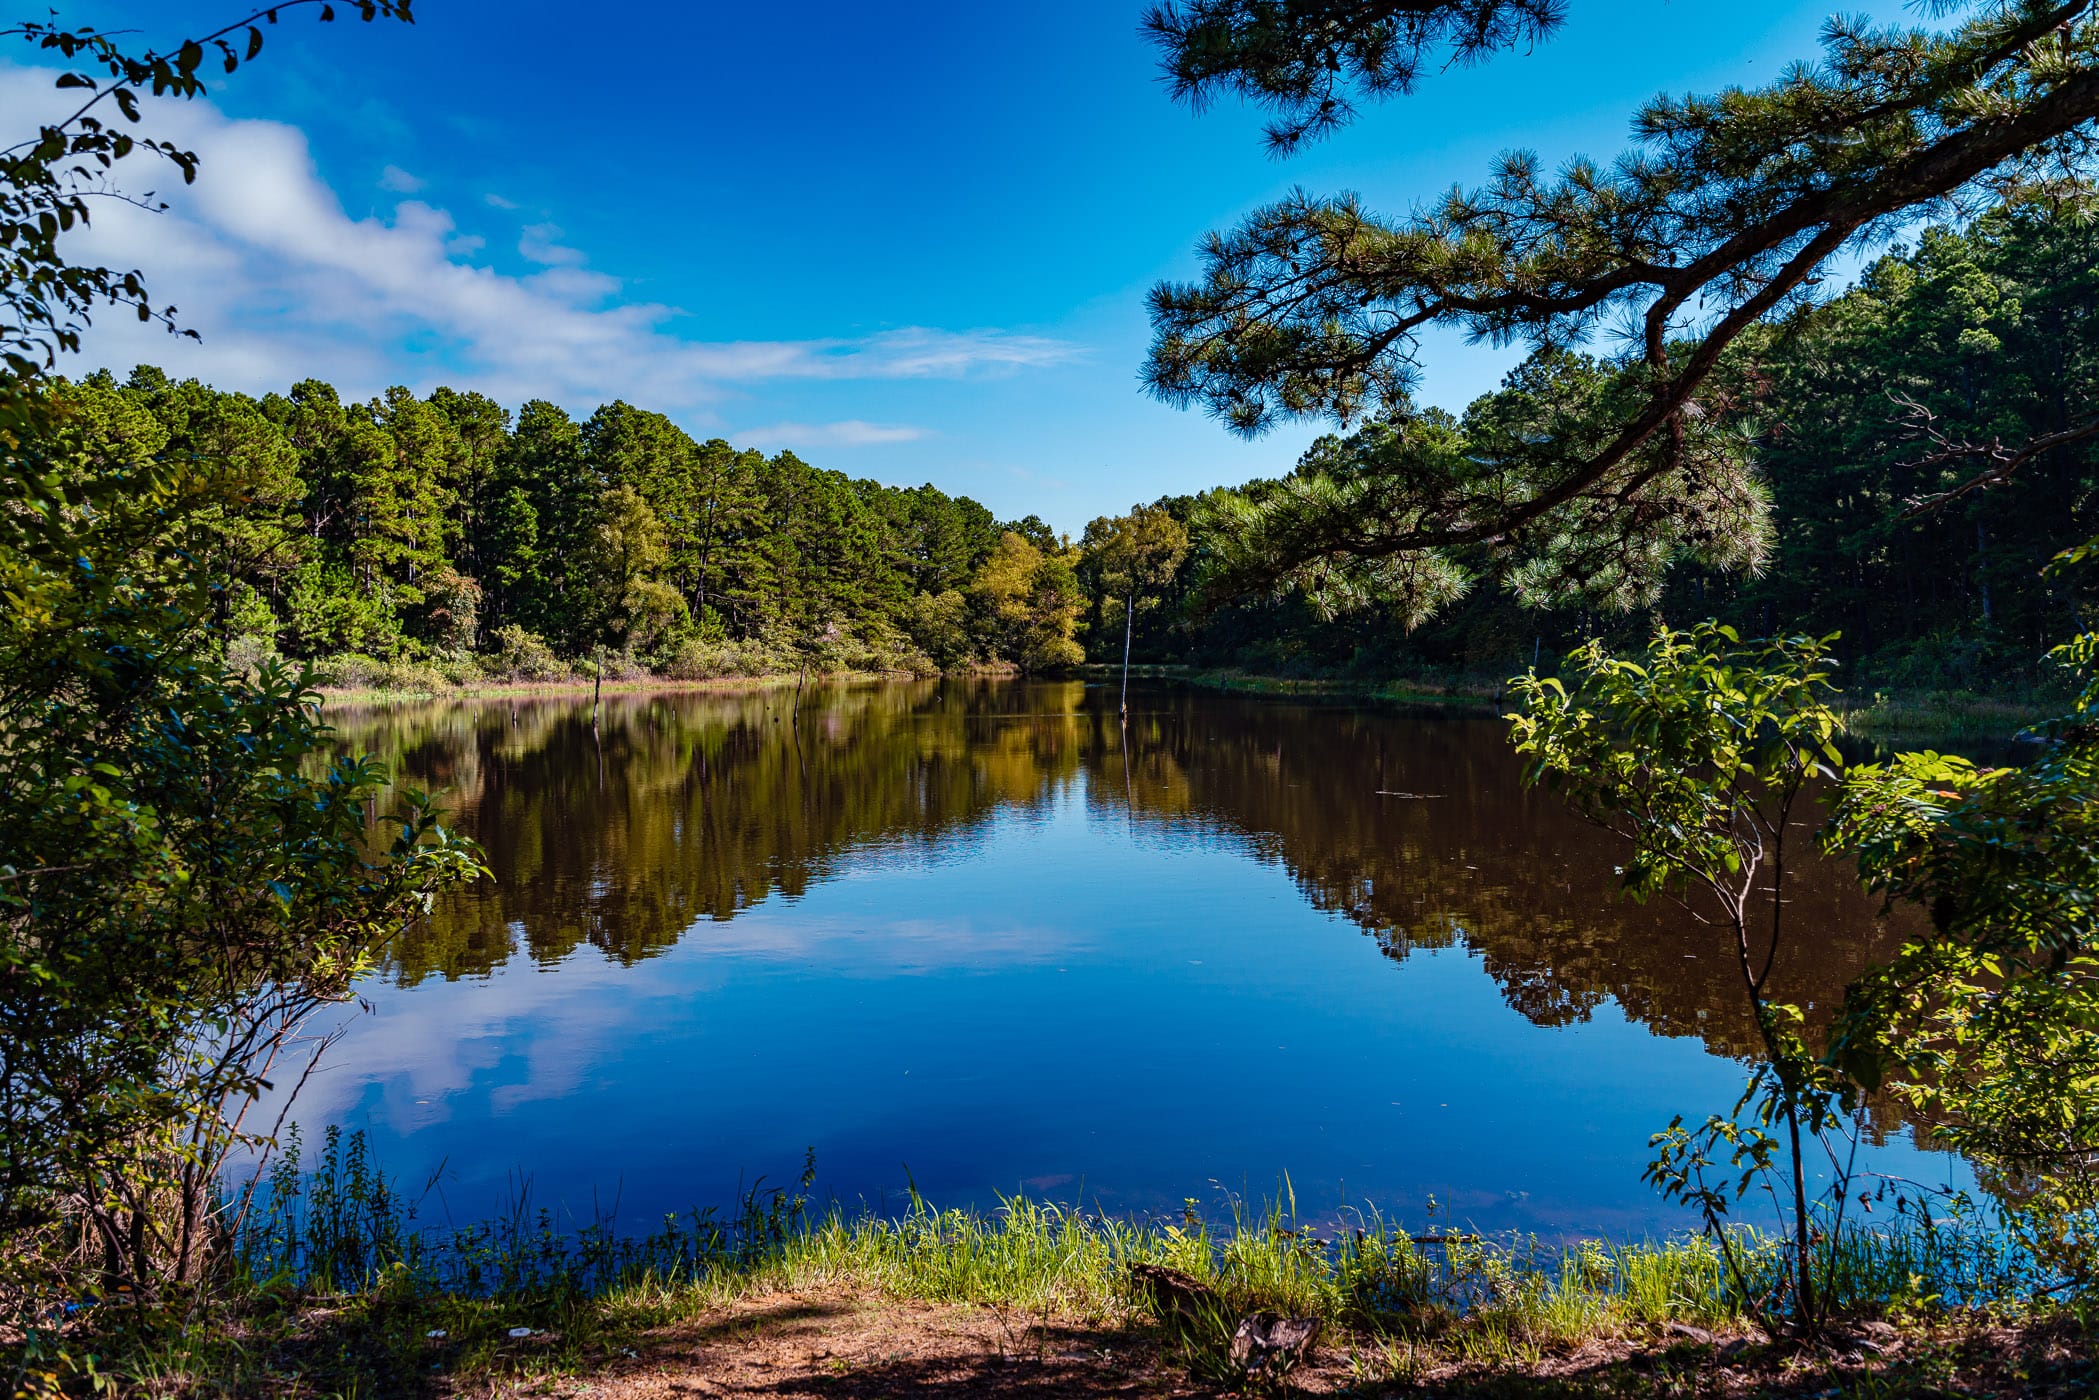 The tranquil waters of a pond at Oklahoma's McGee Creek State Park.